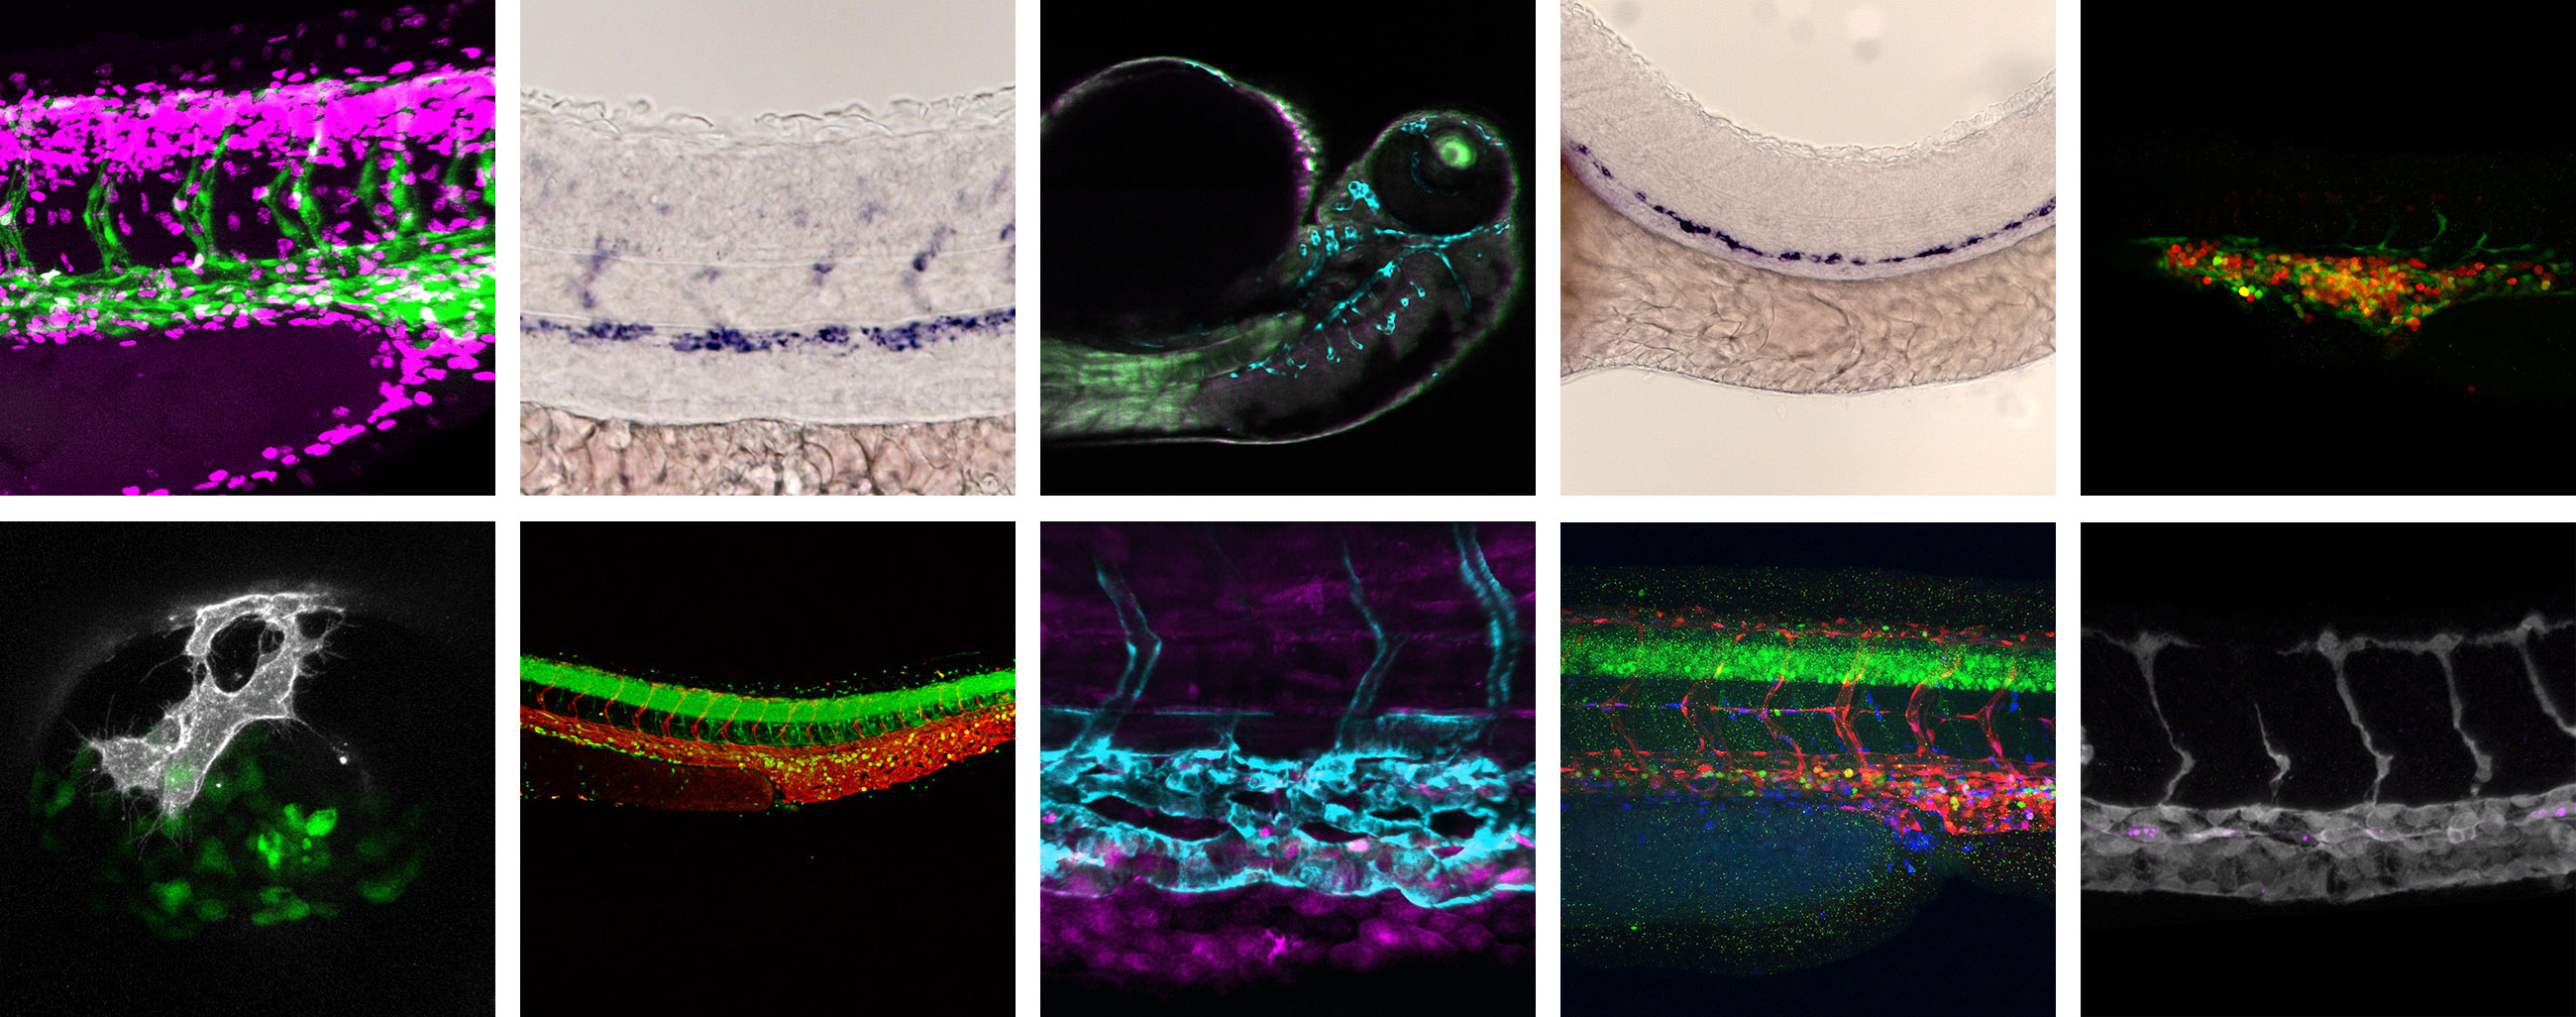 Mosaic of Trista North Lab research images showing zebrafish